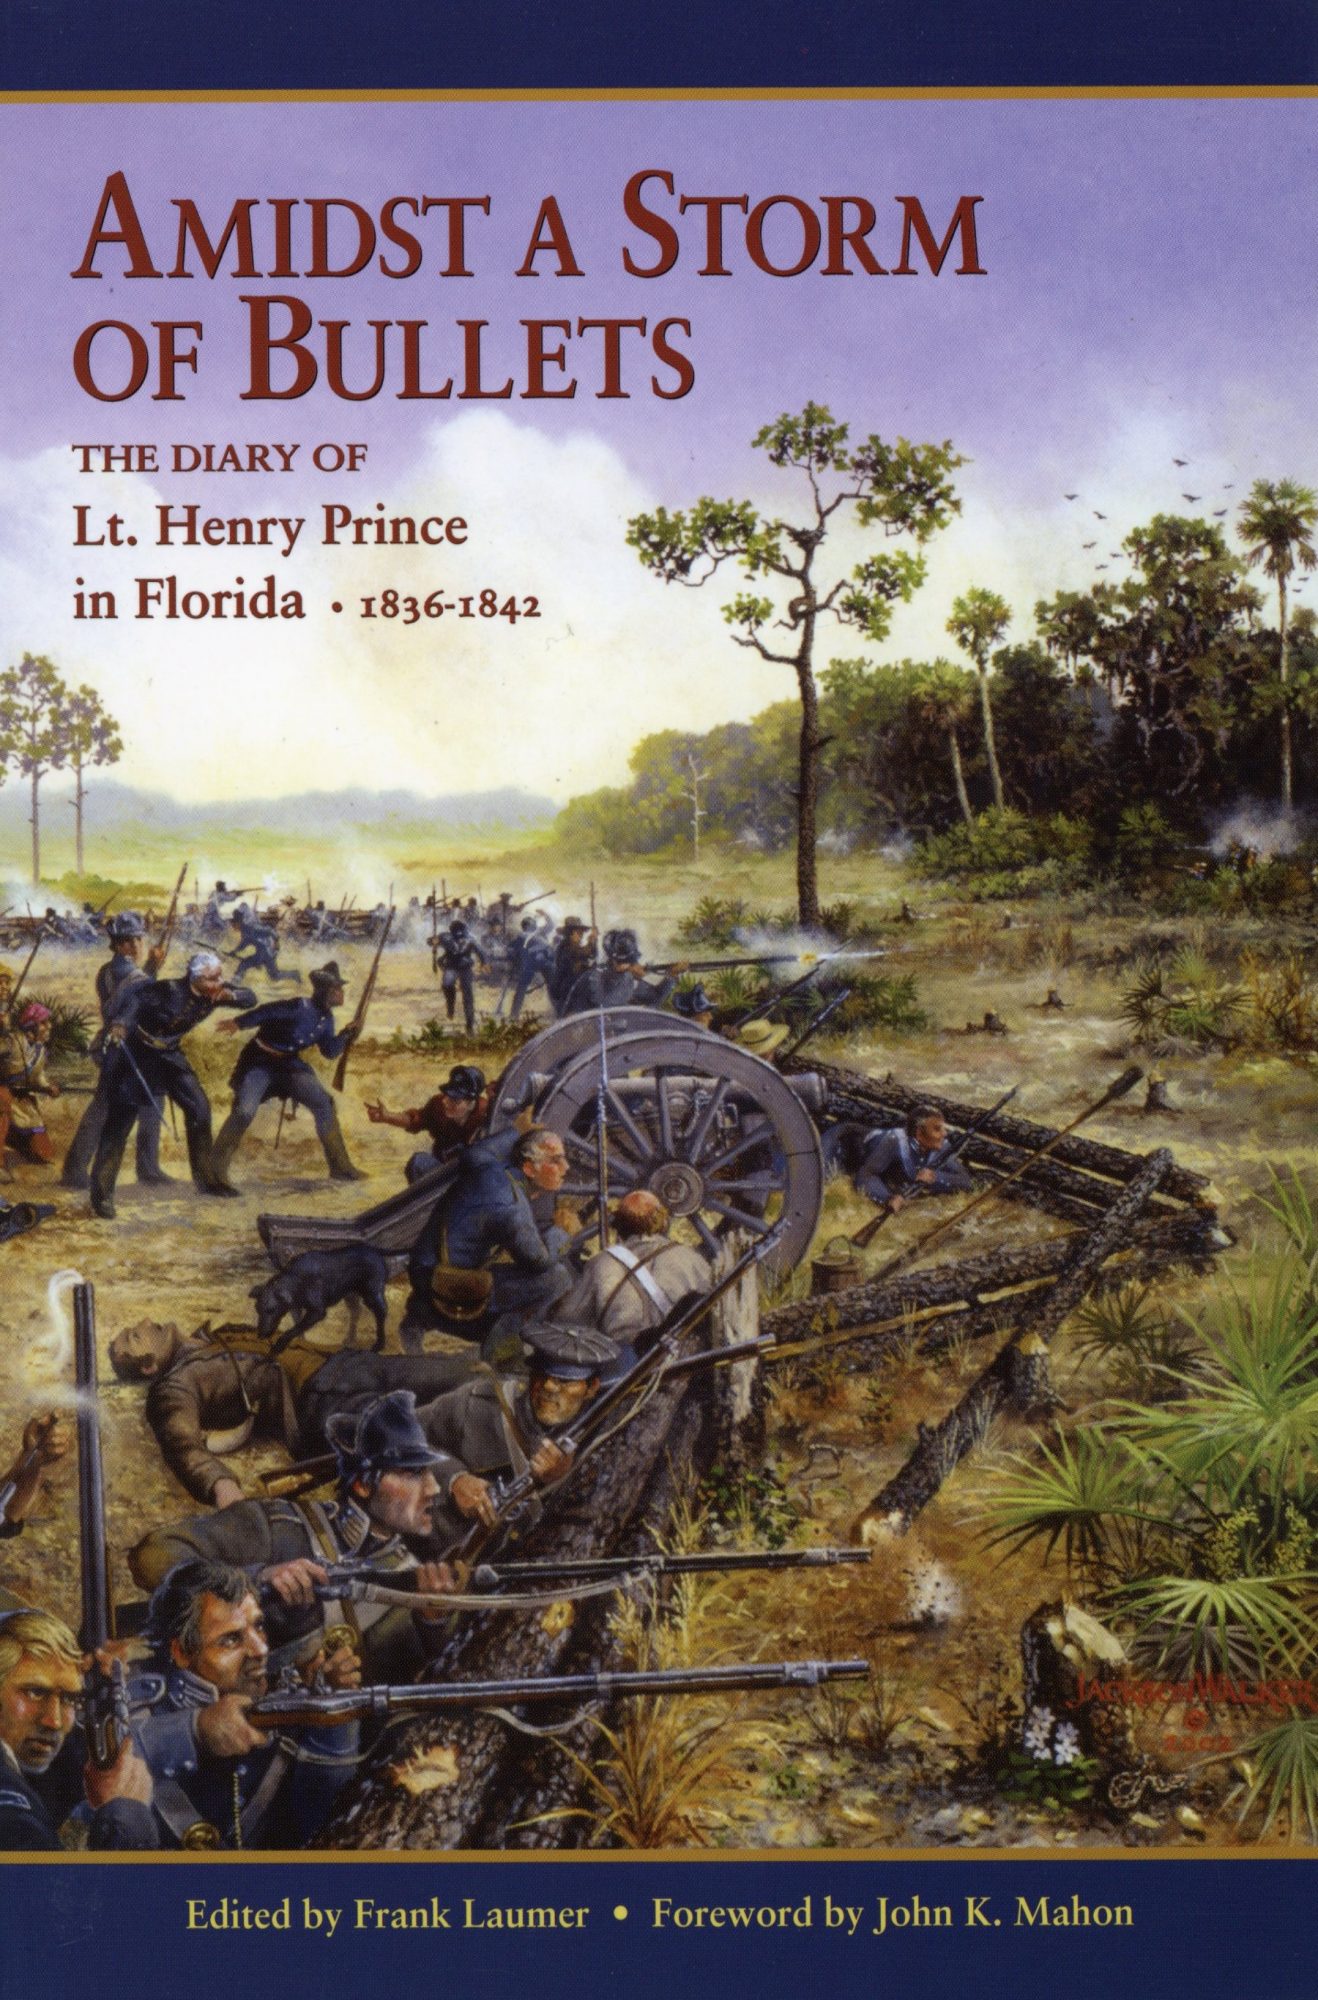 An image of the front cover of the book, Amidst a Storm of Bullets.